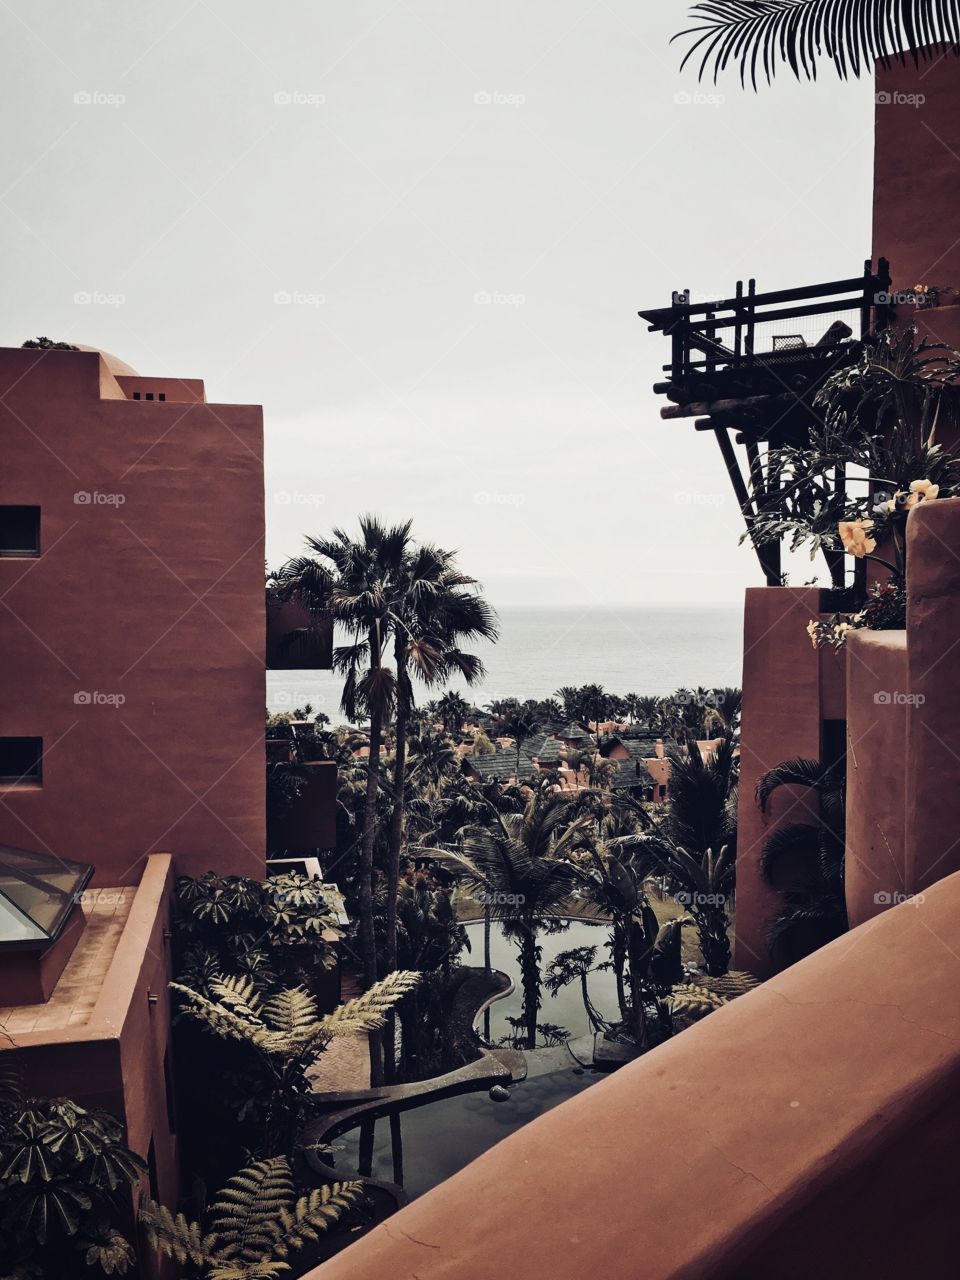 You are not looking for this place, but then it‘s there... a Secret City! This is an amazing view from one of the most beautiful hotels I have seen so far, the Abama Hotel in Tenerife. I am always glad to be here on vacation, because here I feel free